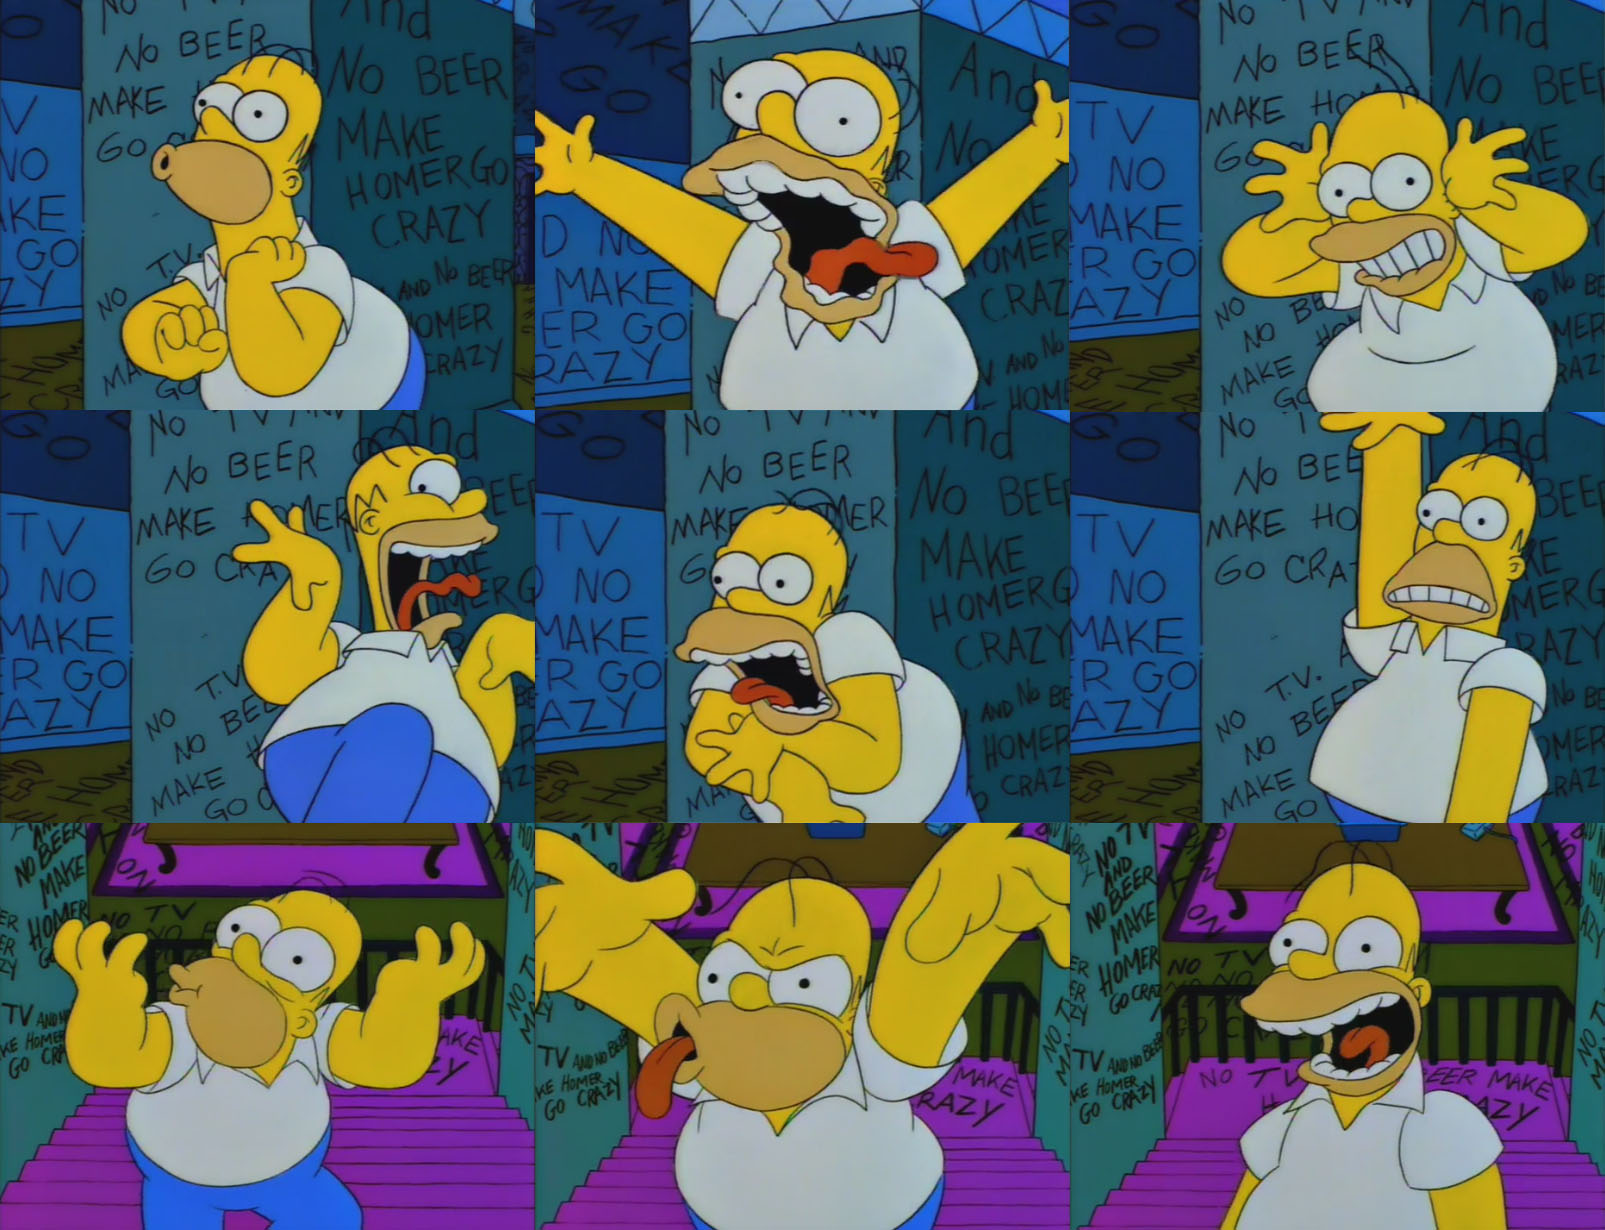 That treehouse of horror episode where homer goes insane and scares himself...